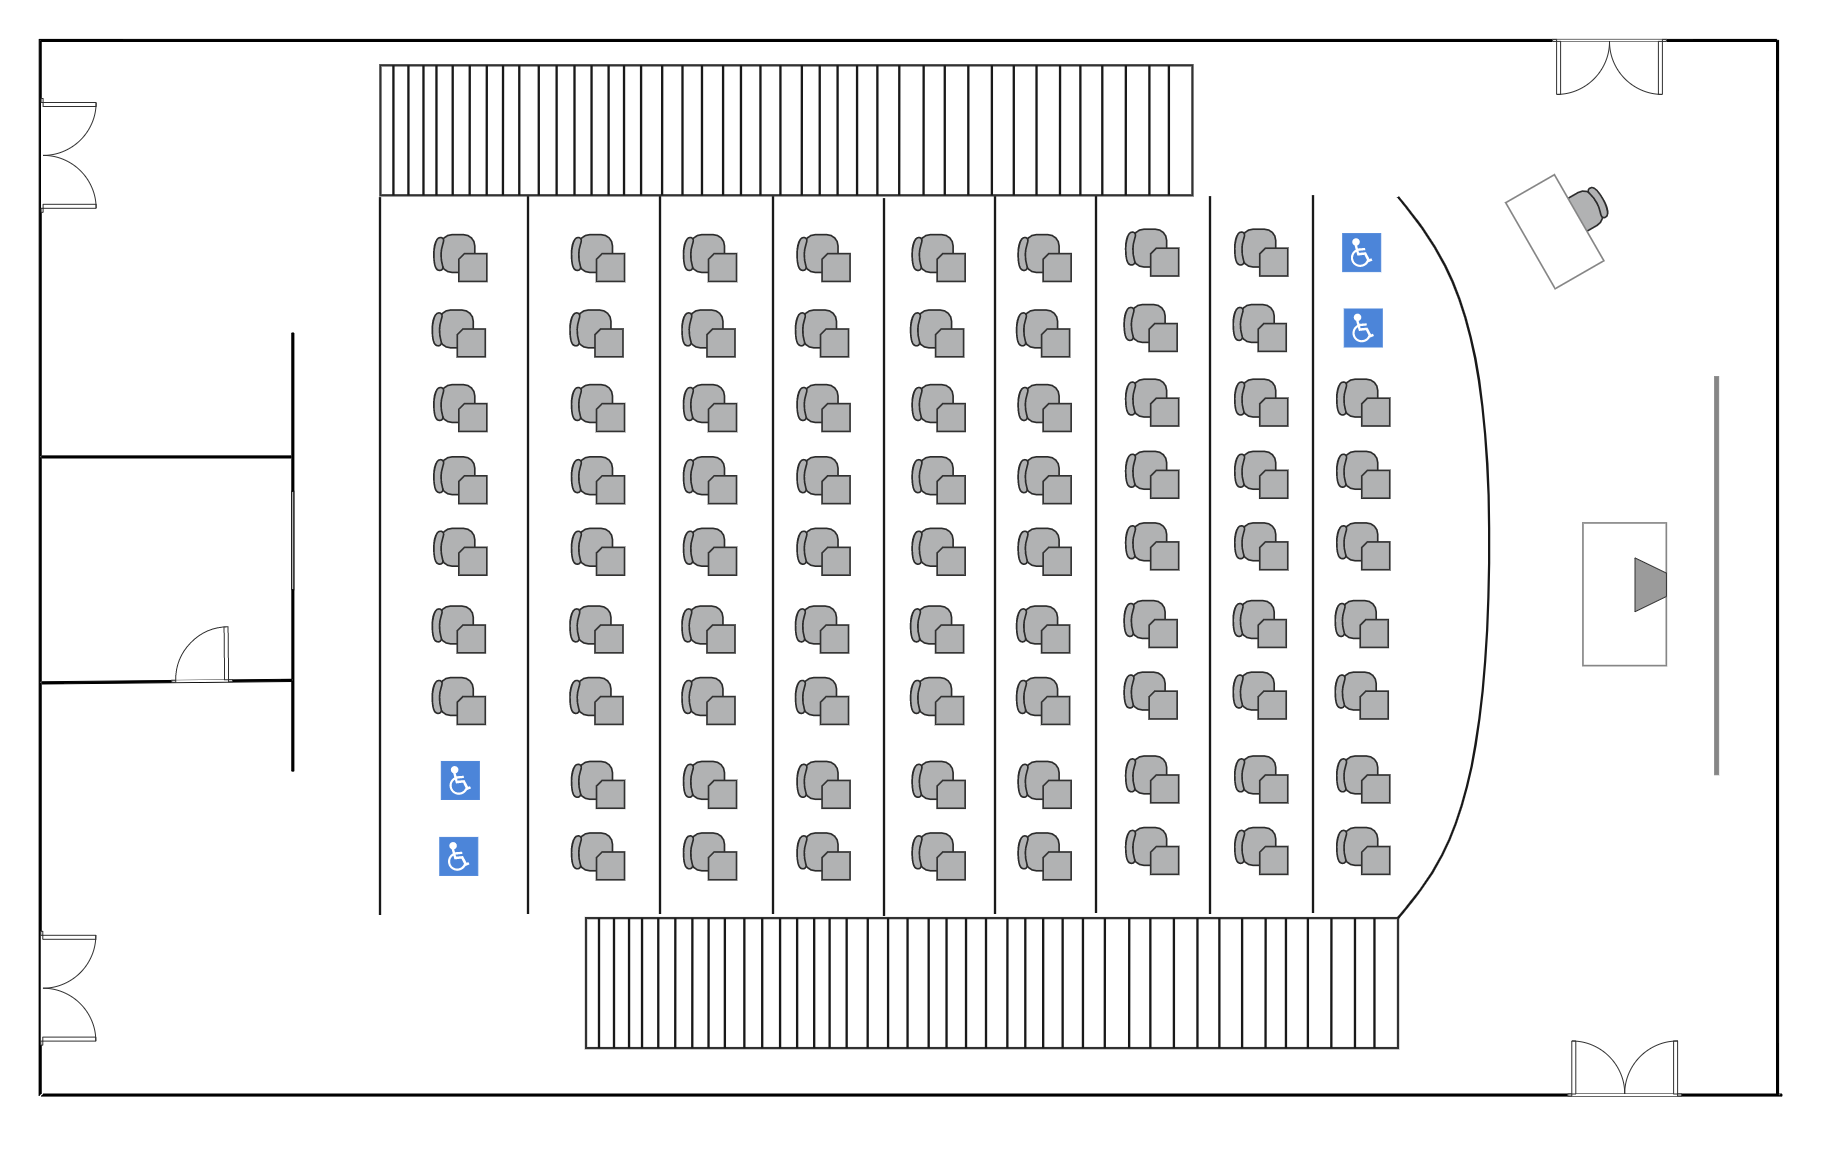 Lecture Hall Seating Plan | EdrawMax Template